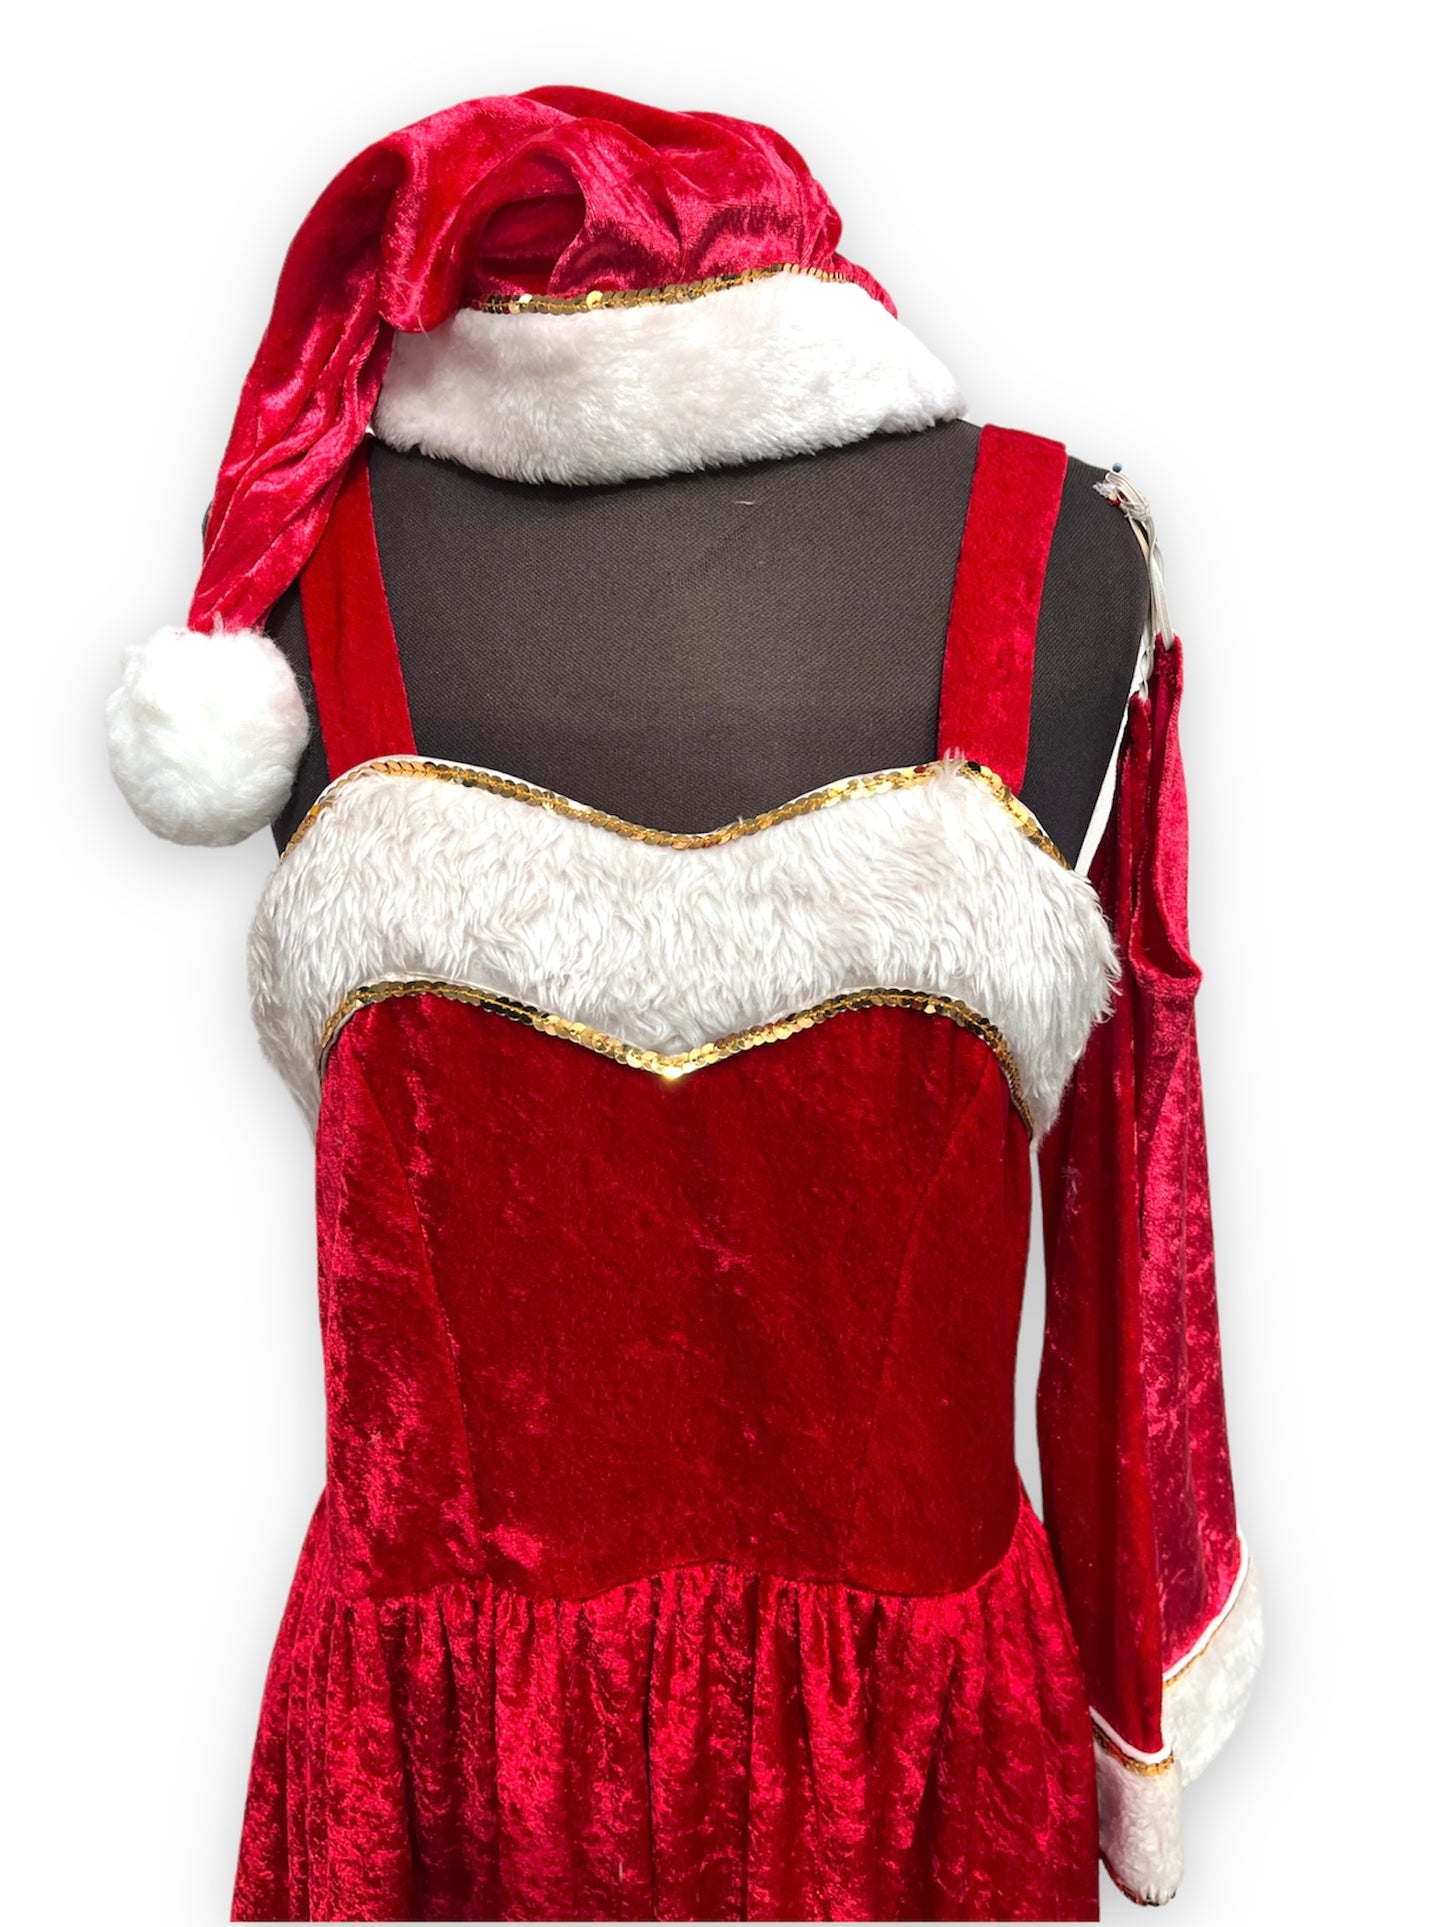 Ms Christmas/Mrs Claus Red Dress, Hat & Gloves - Ex Hire Fancy Dress Costume